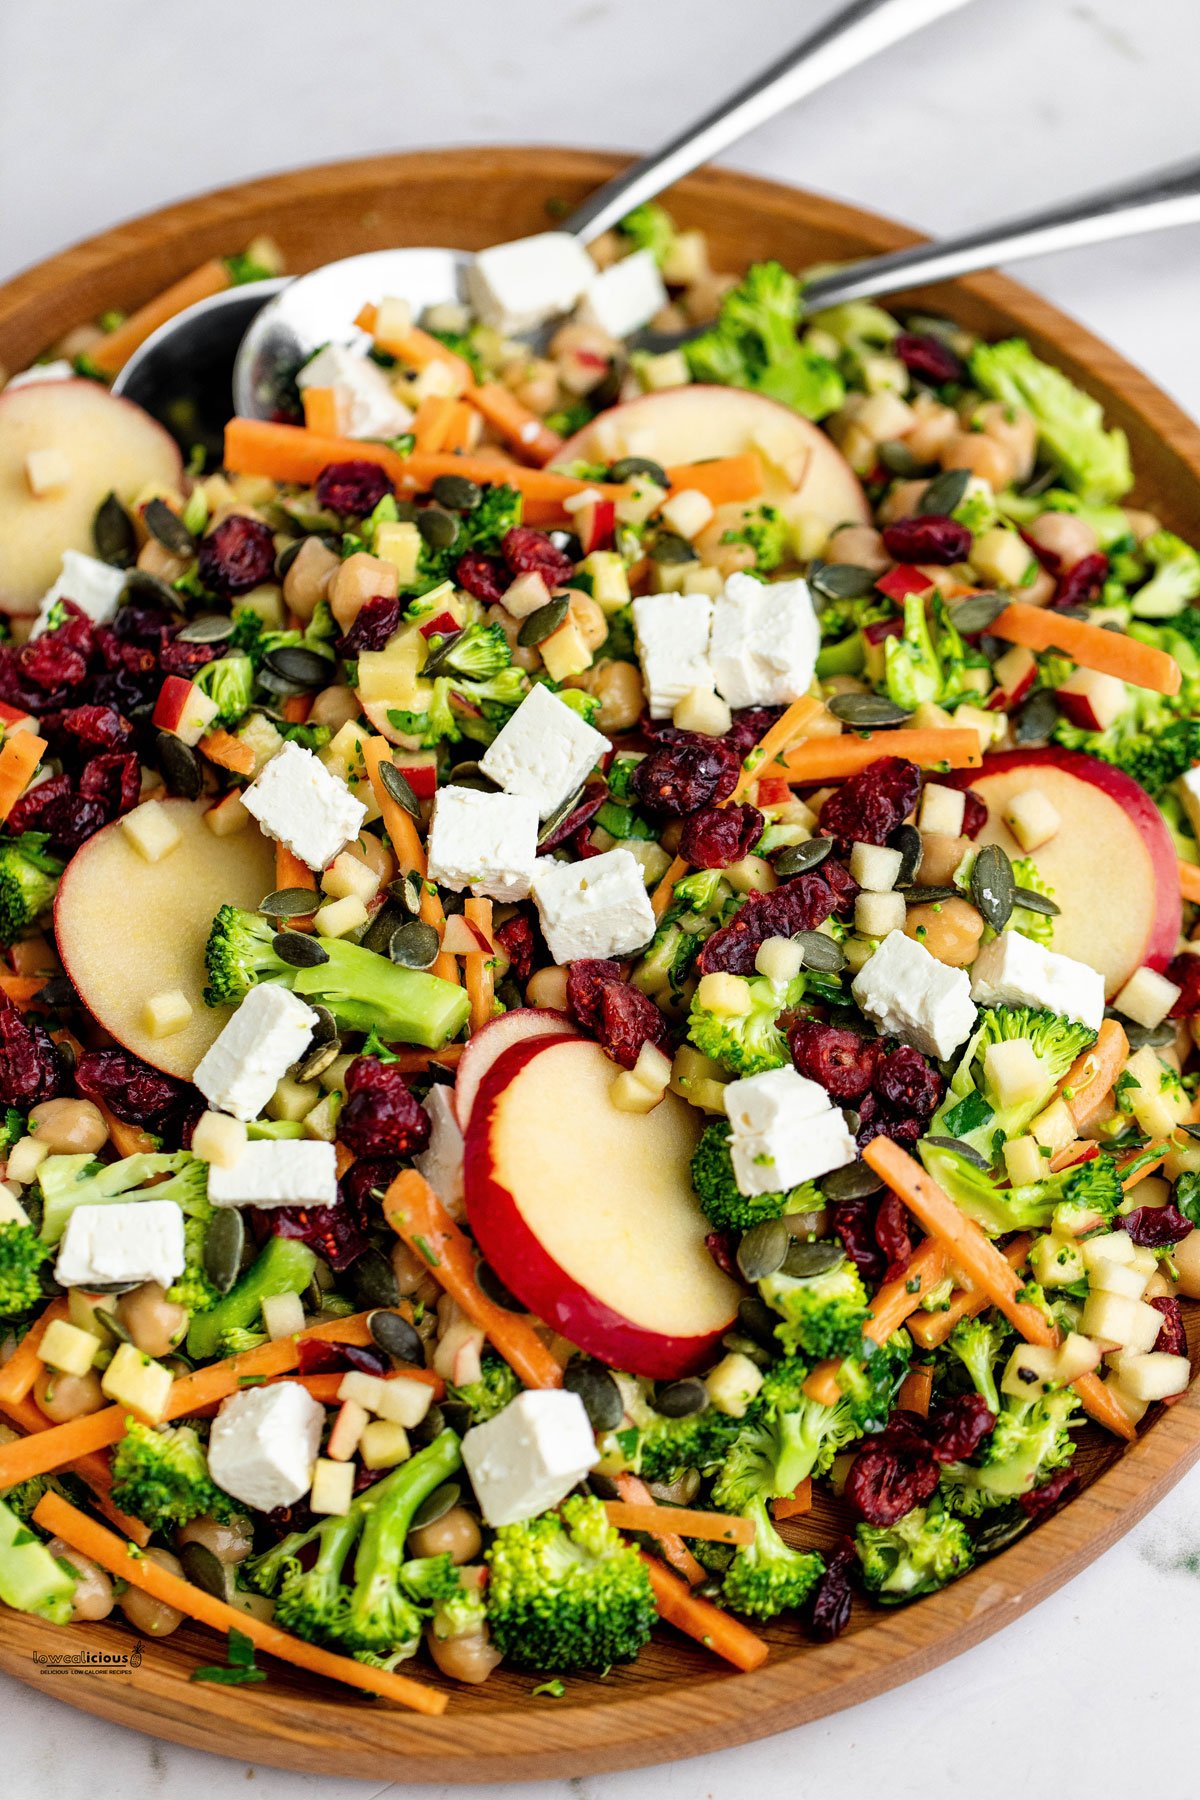 Healthy Broccoli Apple Salad Recipe with Cranberries in a large wood serving bowl with two serving spoons ready to serve